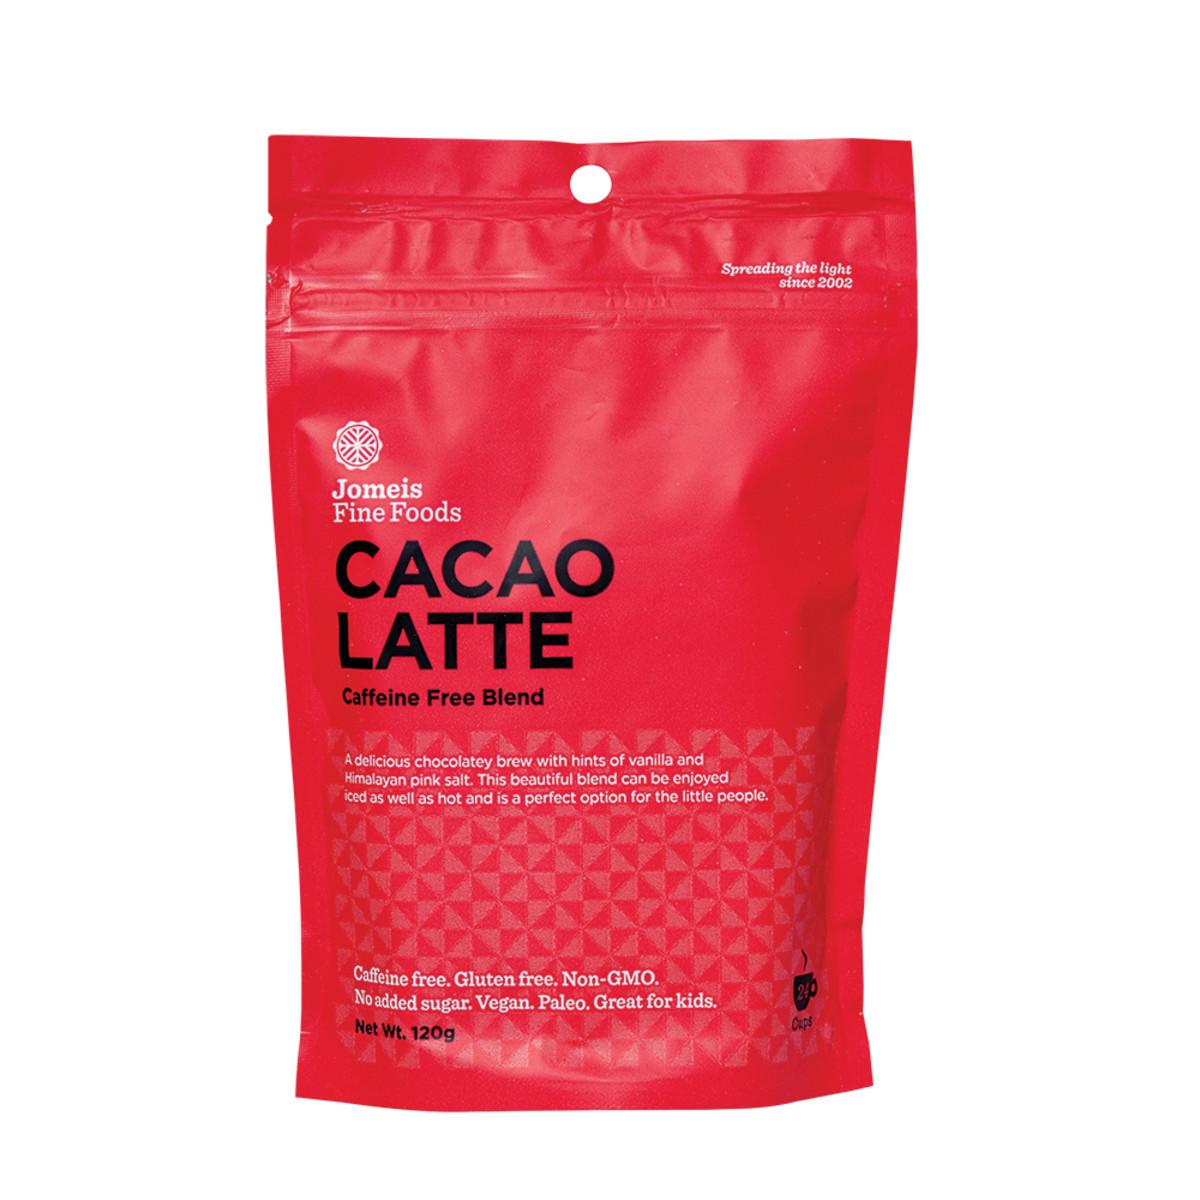 JOMEIS FINE FOODS – Cacao Latte 120g